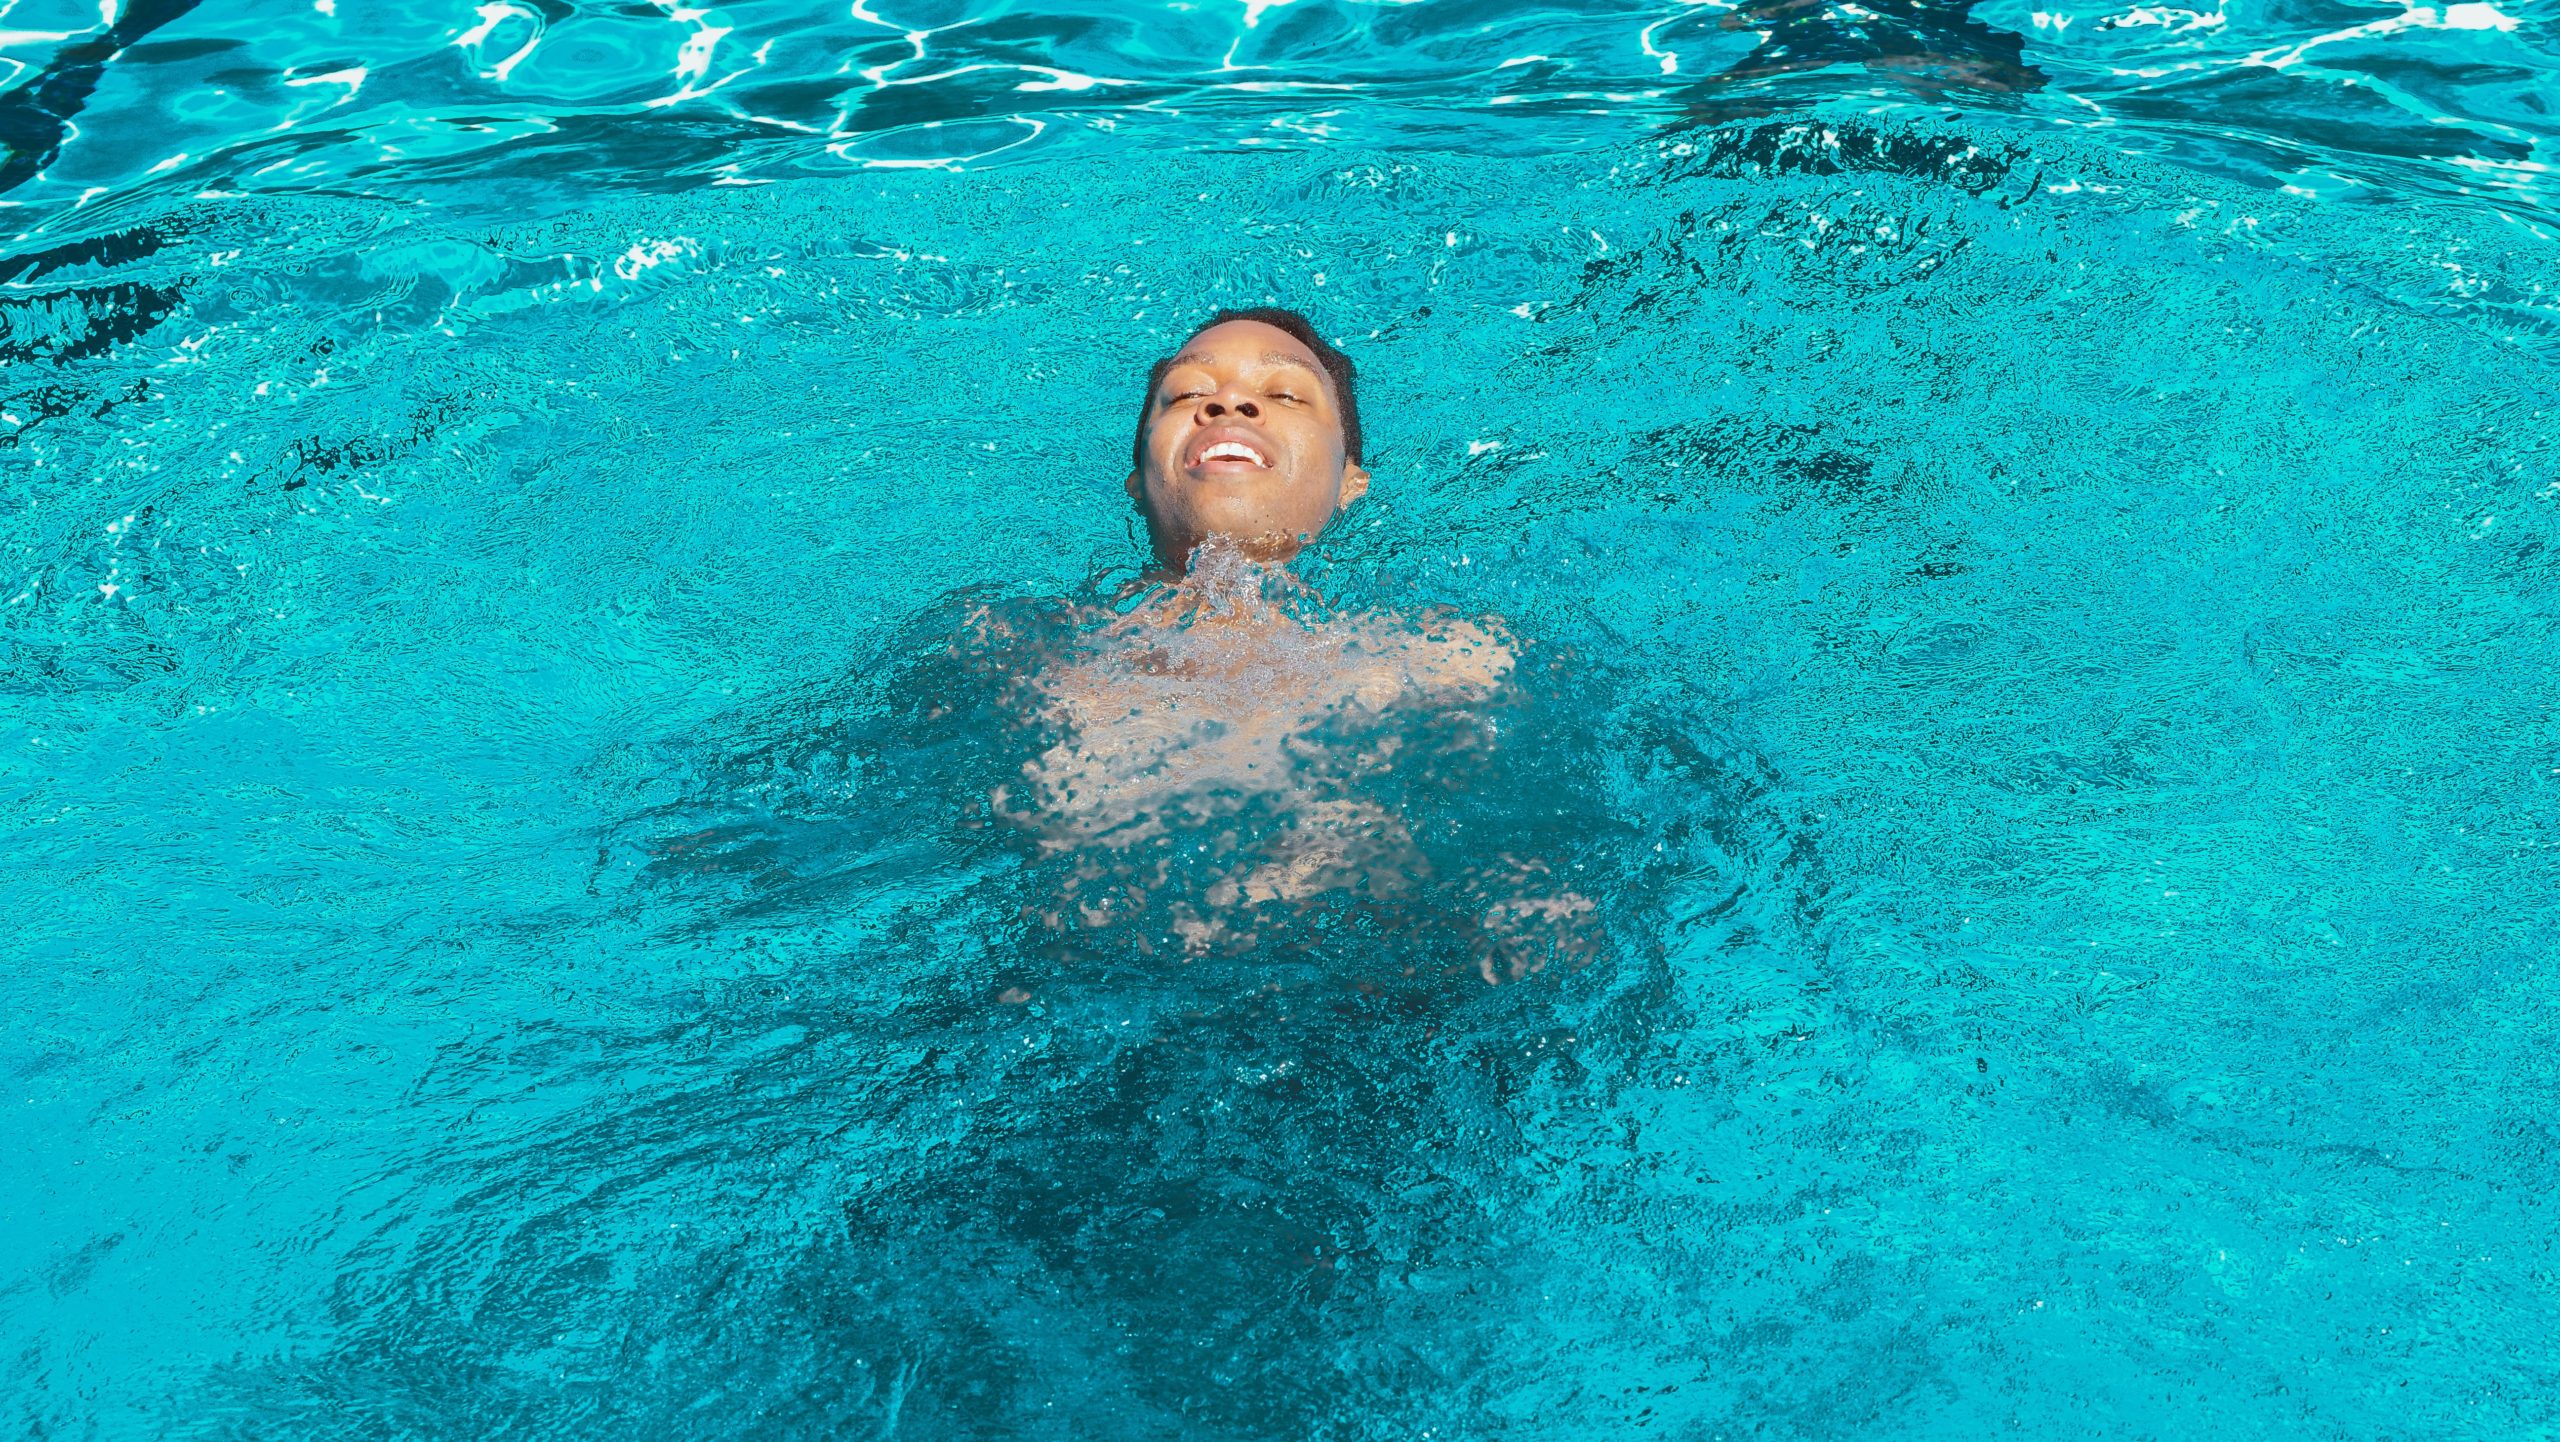 person swimming in pool on their back with head above water